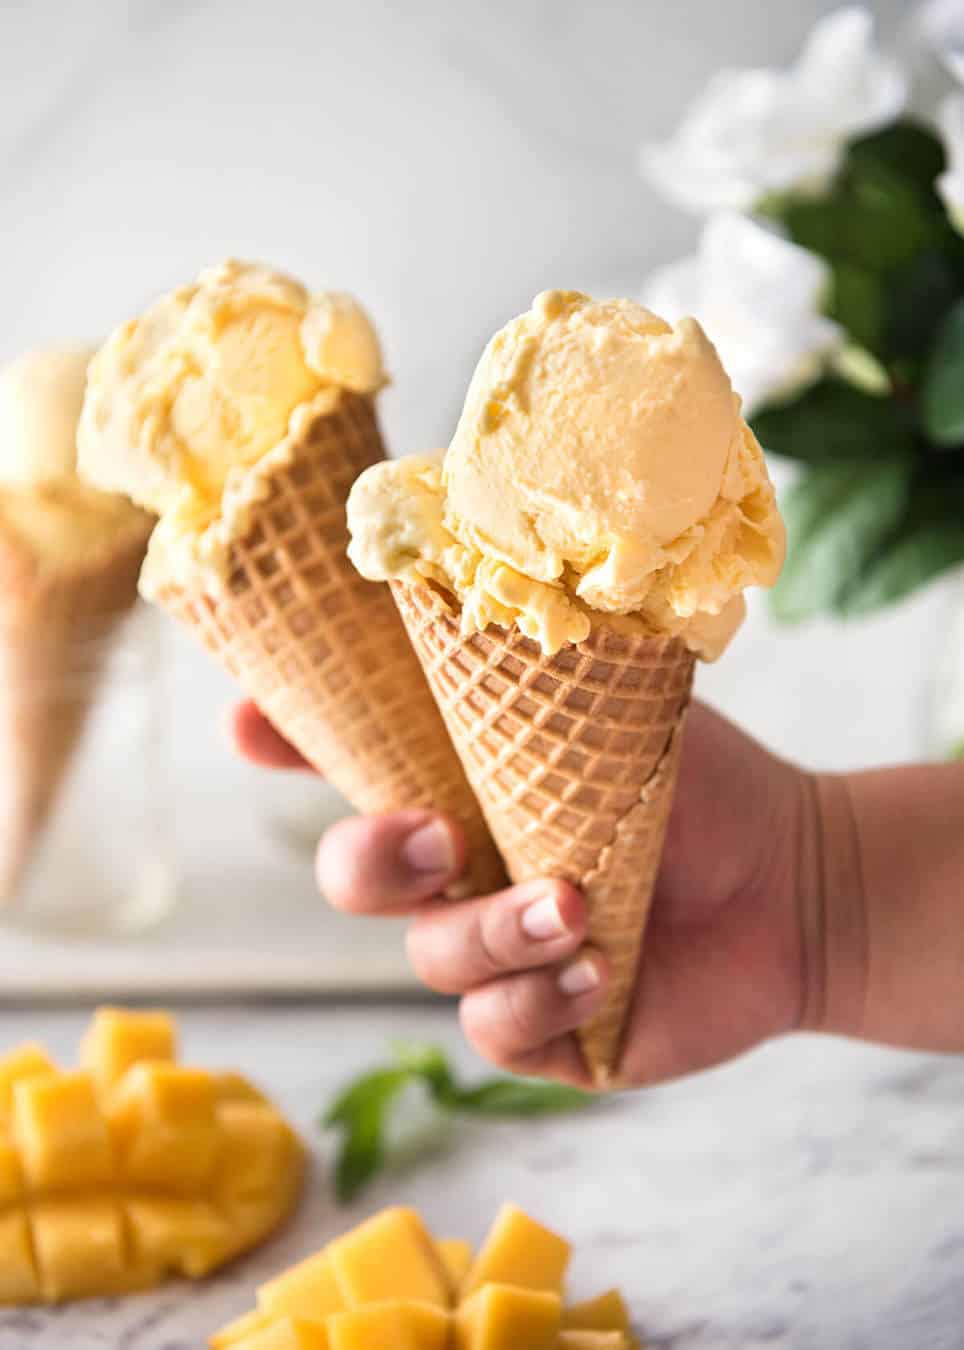 Two ice cream cones with mango ice cream held in a hand.